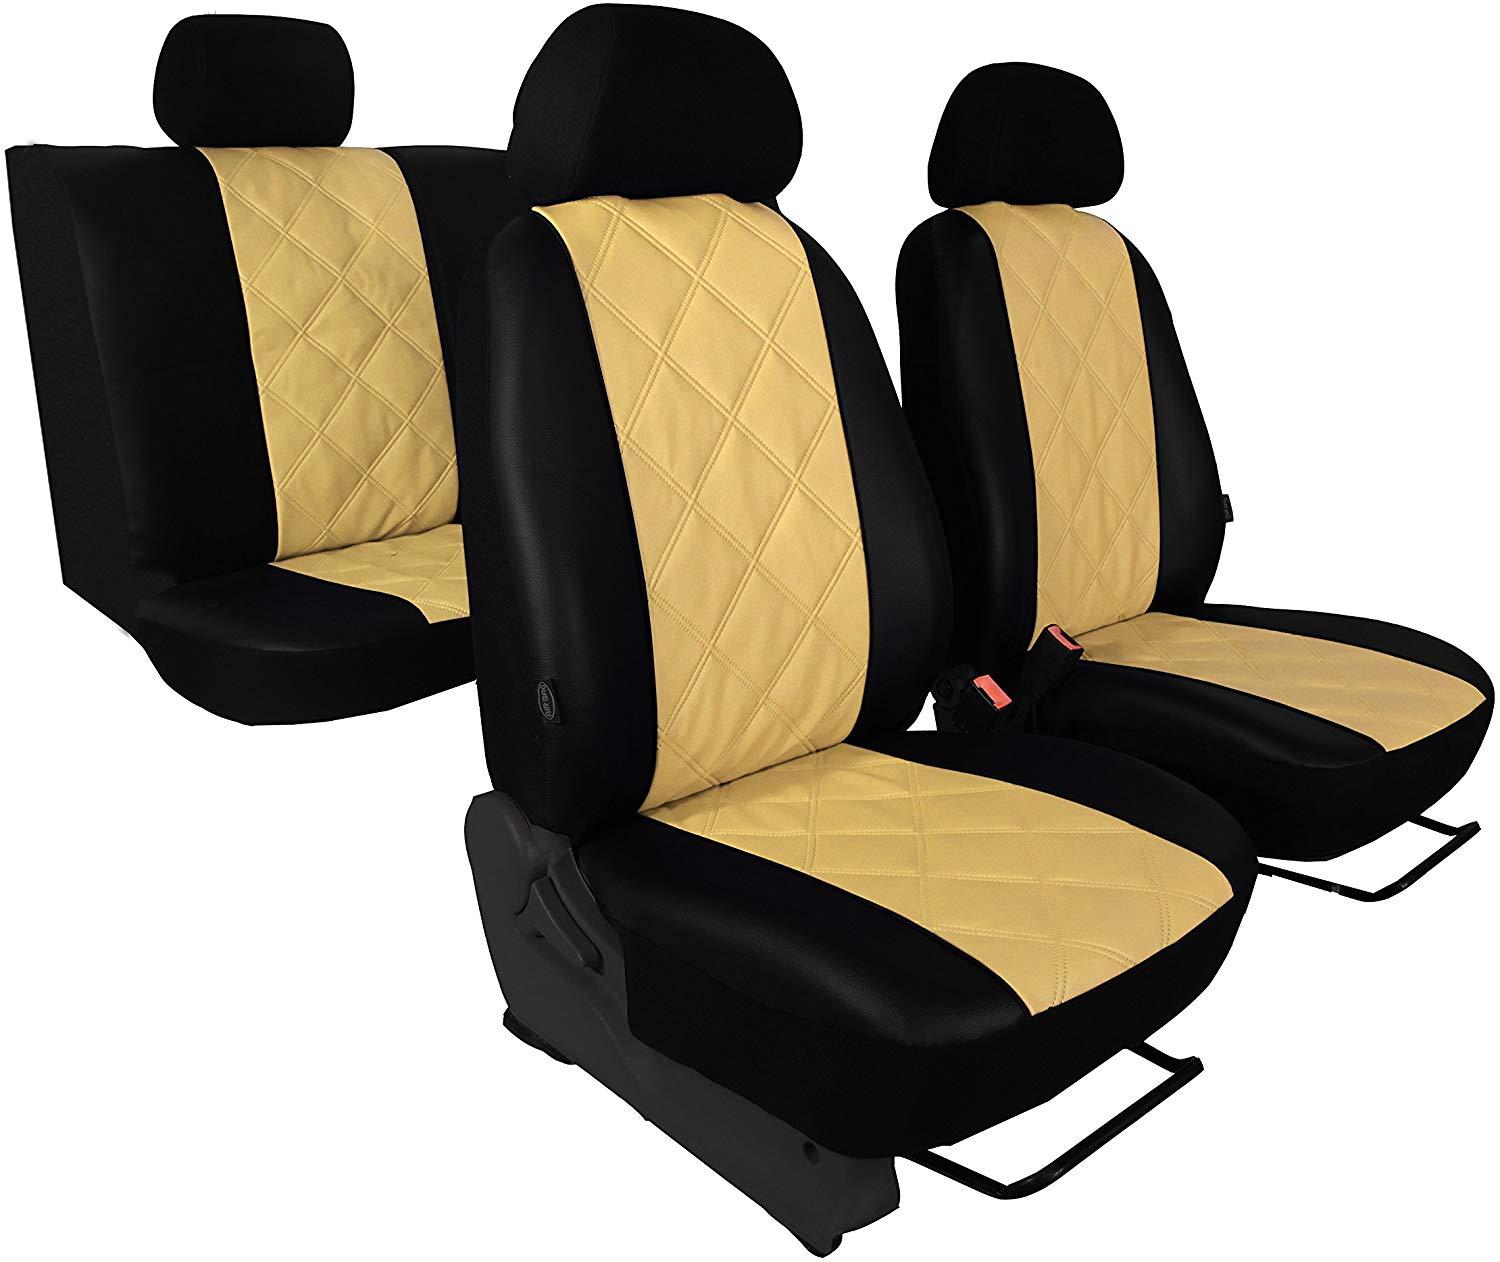 SKODA OCTAVIA 1 to 3 Seat Cover Eco with Diagonal Quilted Leather Seat in 5 Colours